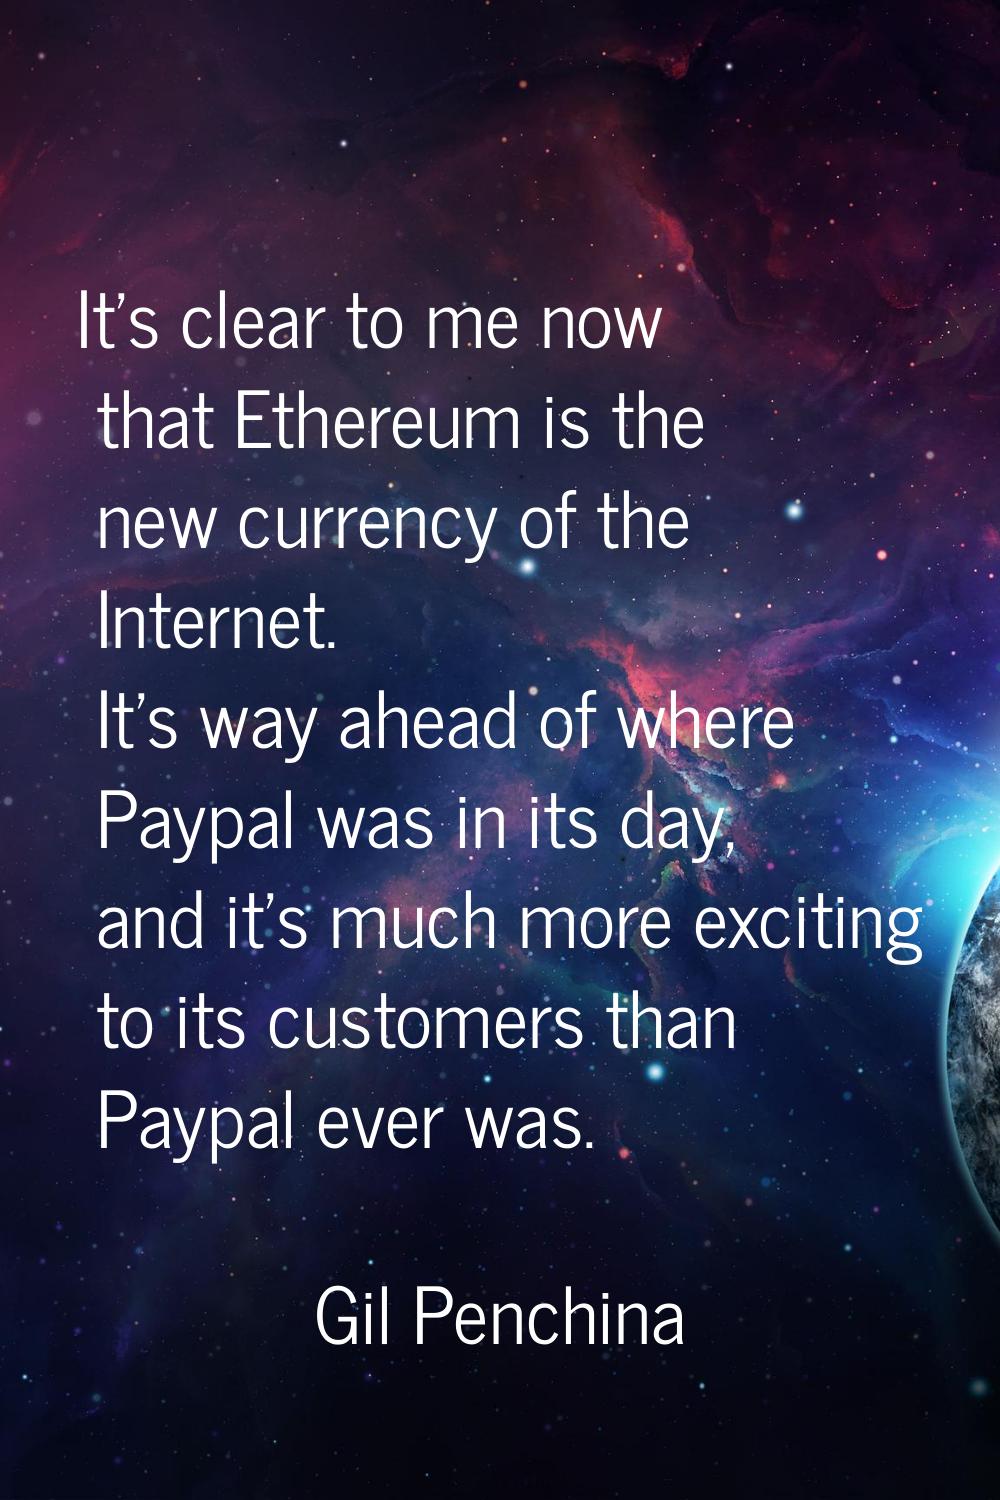 It's clear to me now that Ethereum is the new currency of the Internet. It's way ahead of where Pay